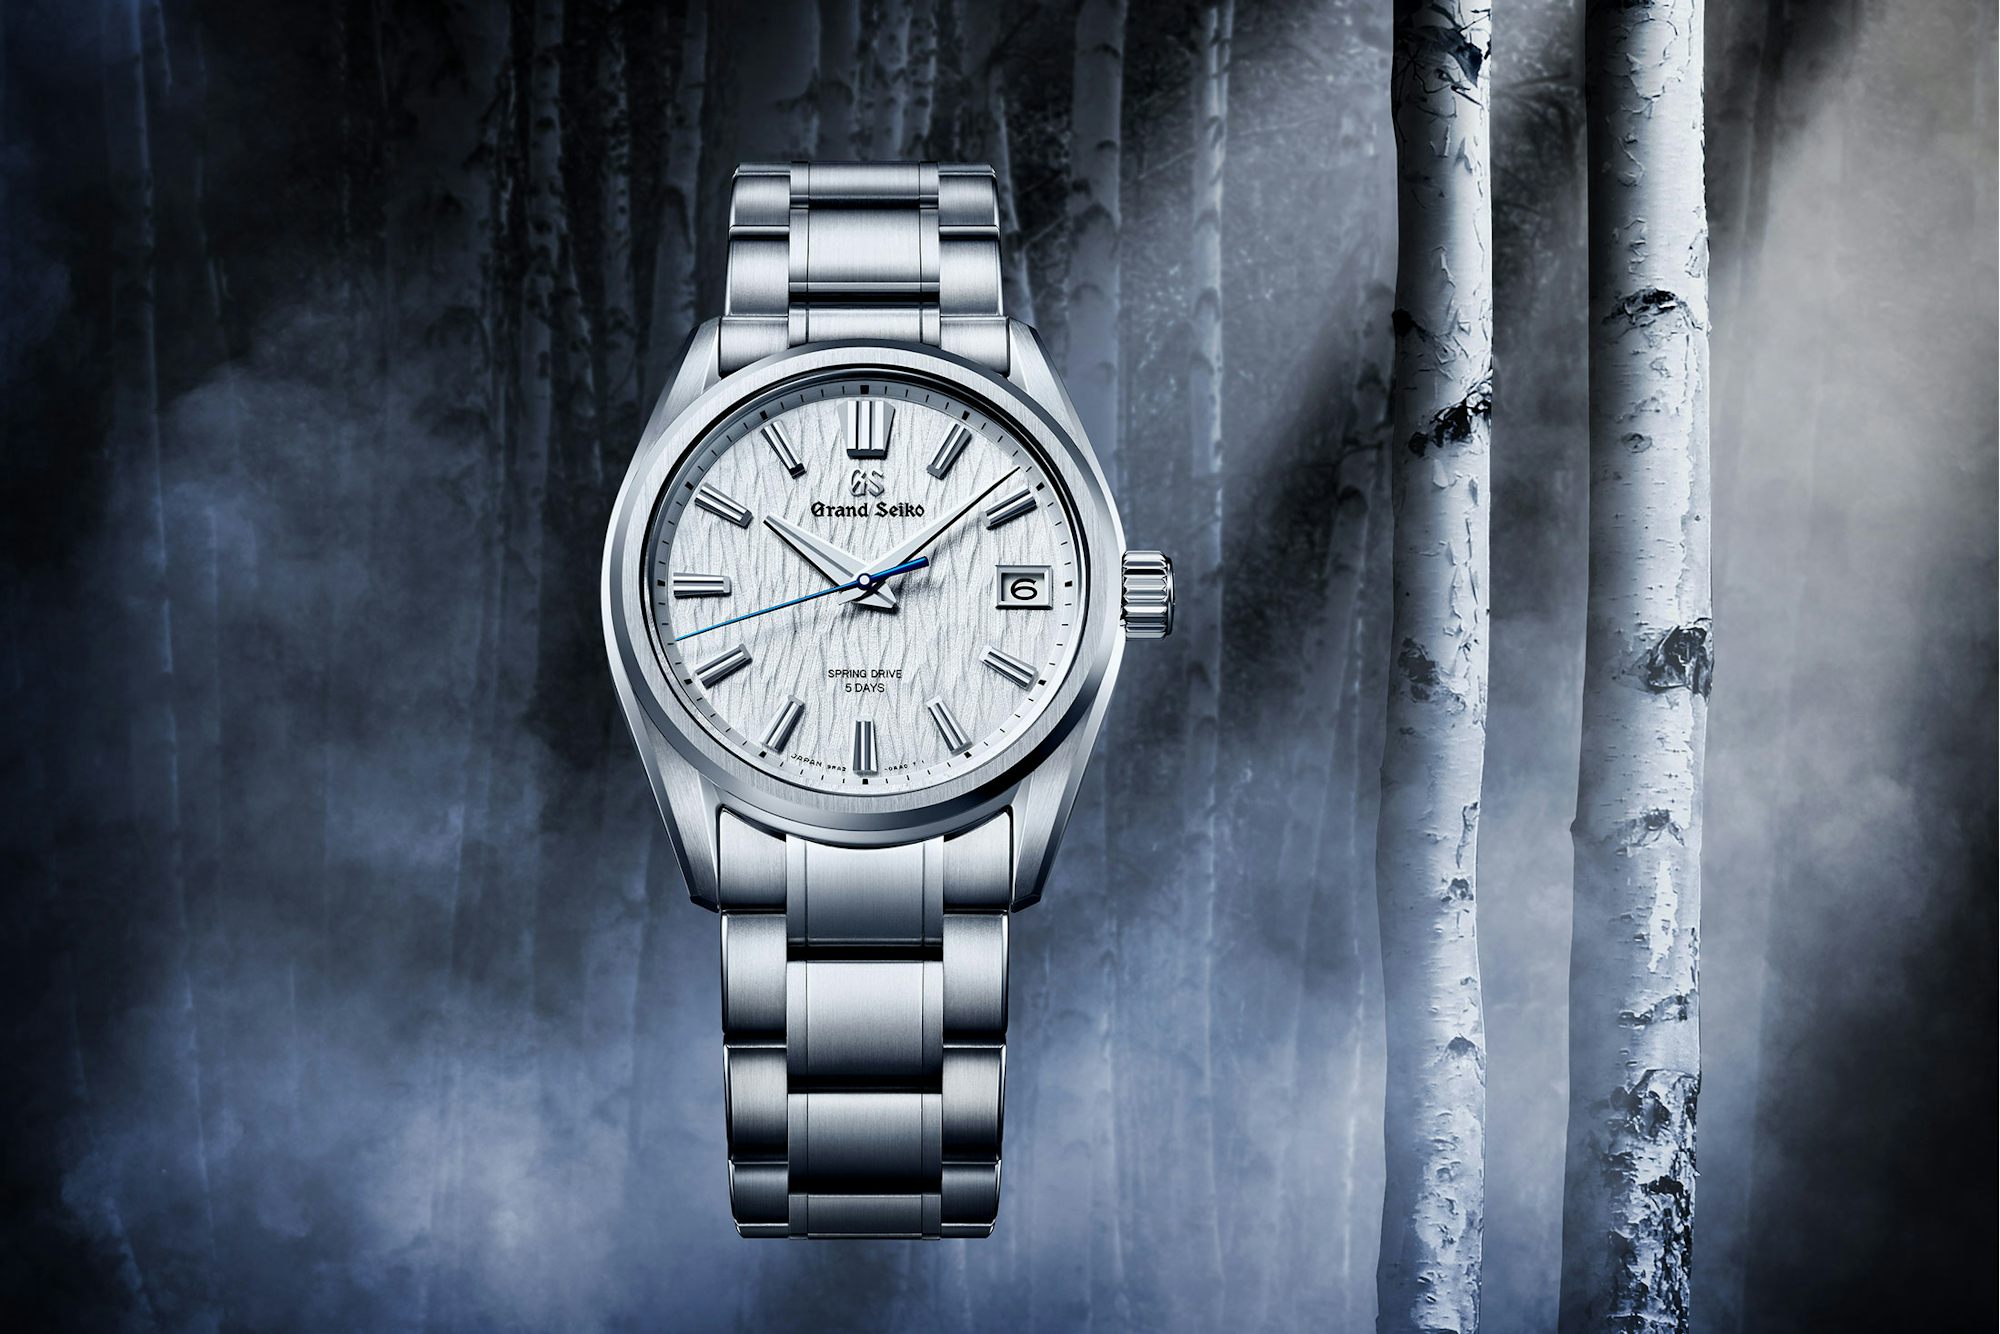 Grand Seiko floating in front of a birch forest at night